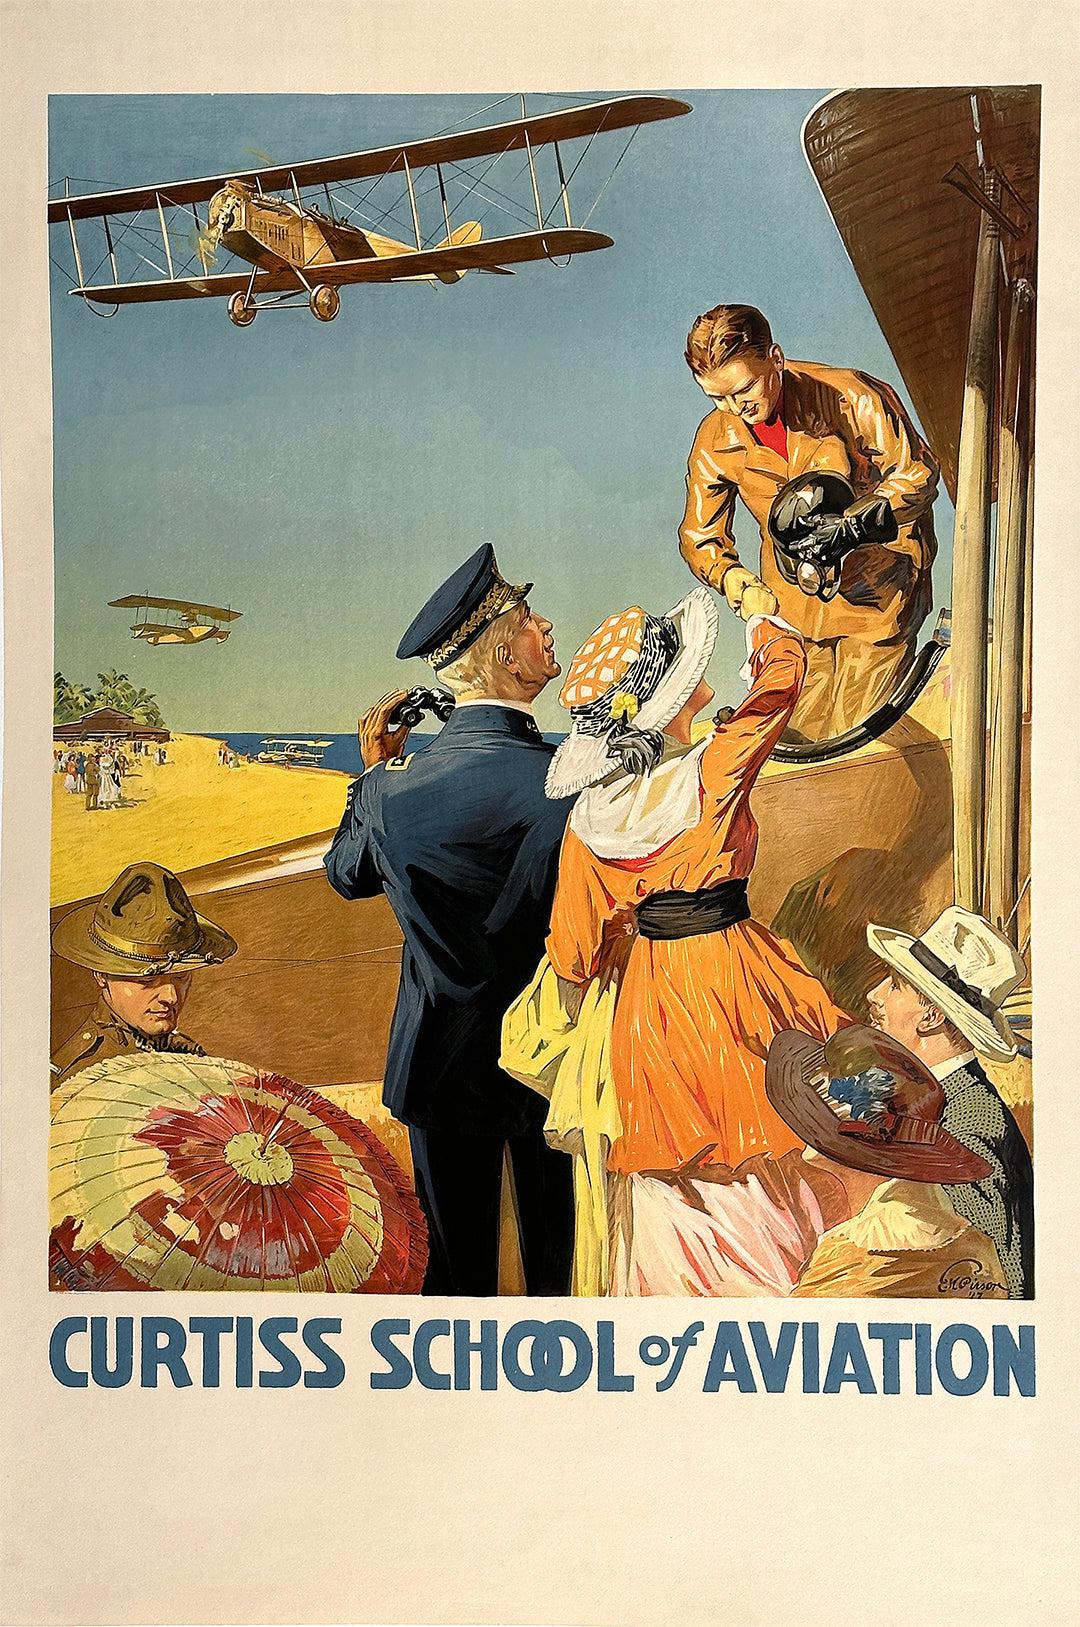 Original Vintage Curtiss School of Aviation Poster by E.W. Pirson 1917 Early Flight